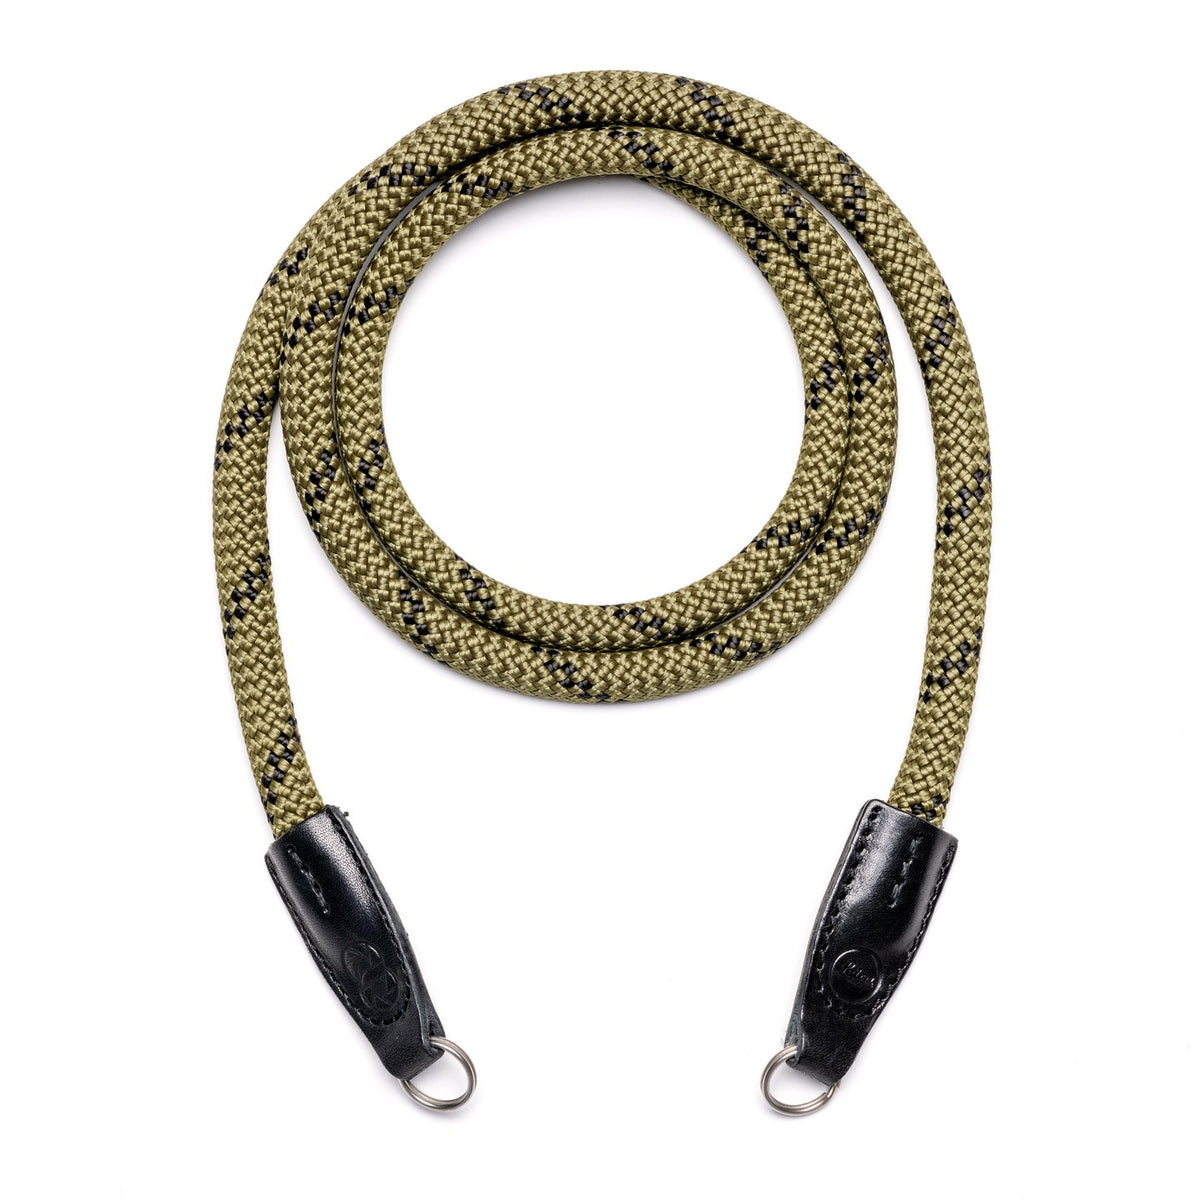 Leica Rope Strap - Olive | COOPH - Wake Concept Store  